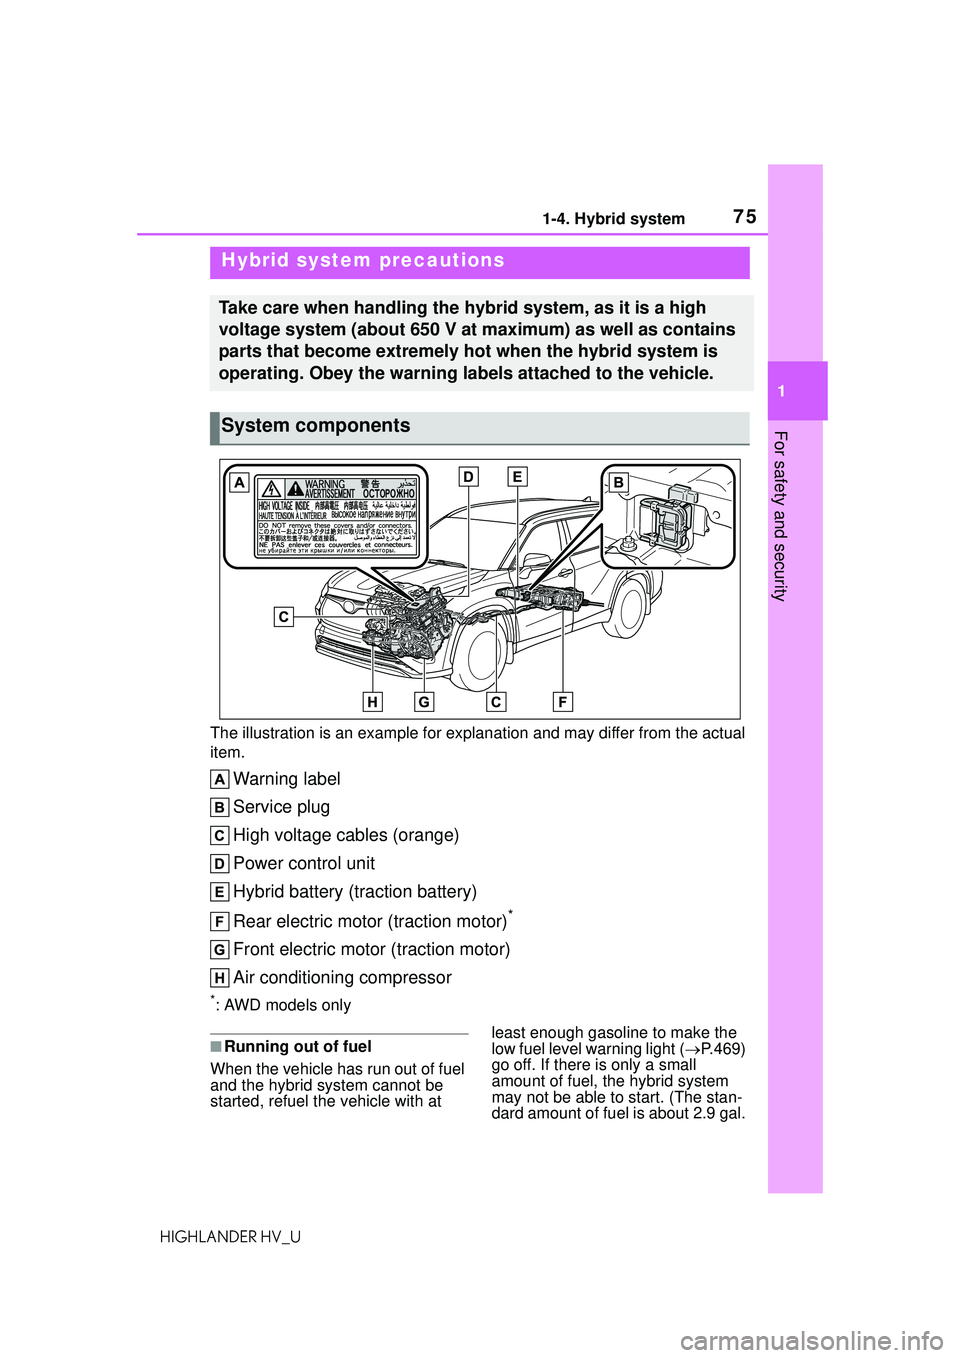 TOYOTA HIGHLANDER HYBRID 2021  Owners Manual (in English) 751-4. Hybrid system
1
For safety and security
HIGHLANDER HV_UThe illustration is an example for explan
ation and may differ from the actual 
item.
Warning label
Service plug
High voltage cables (oran